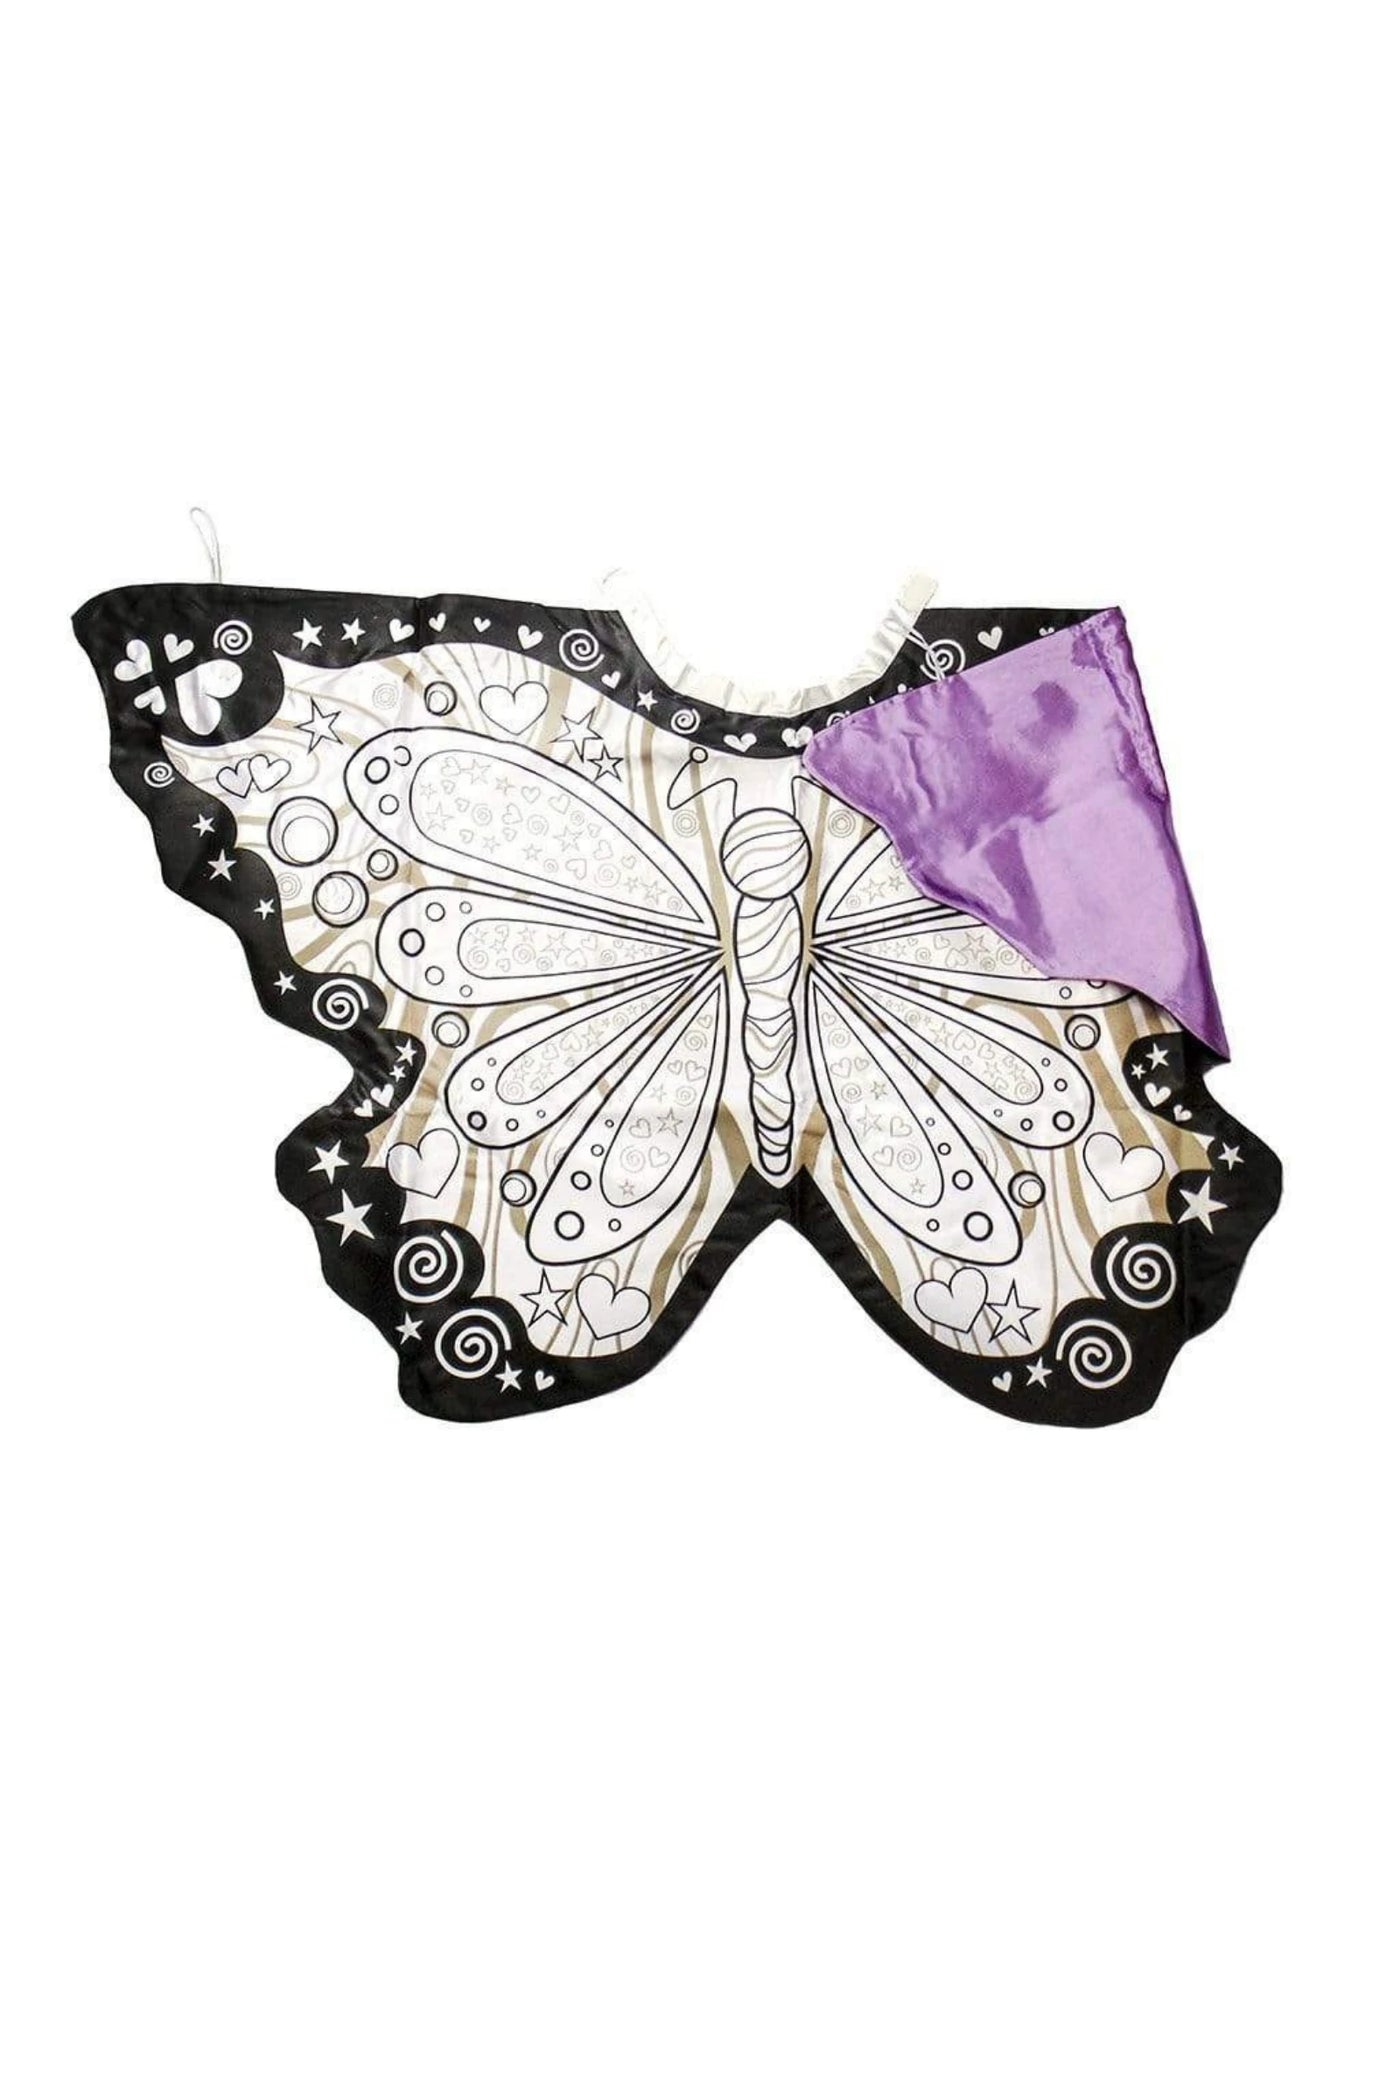 COLOR A BUTTERFLY WINGS